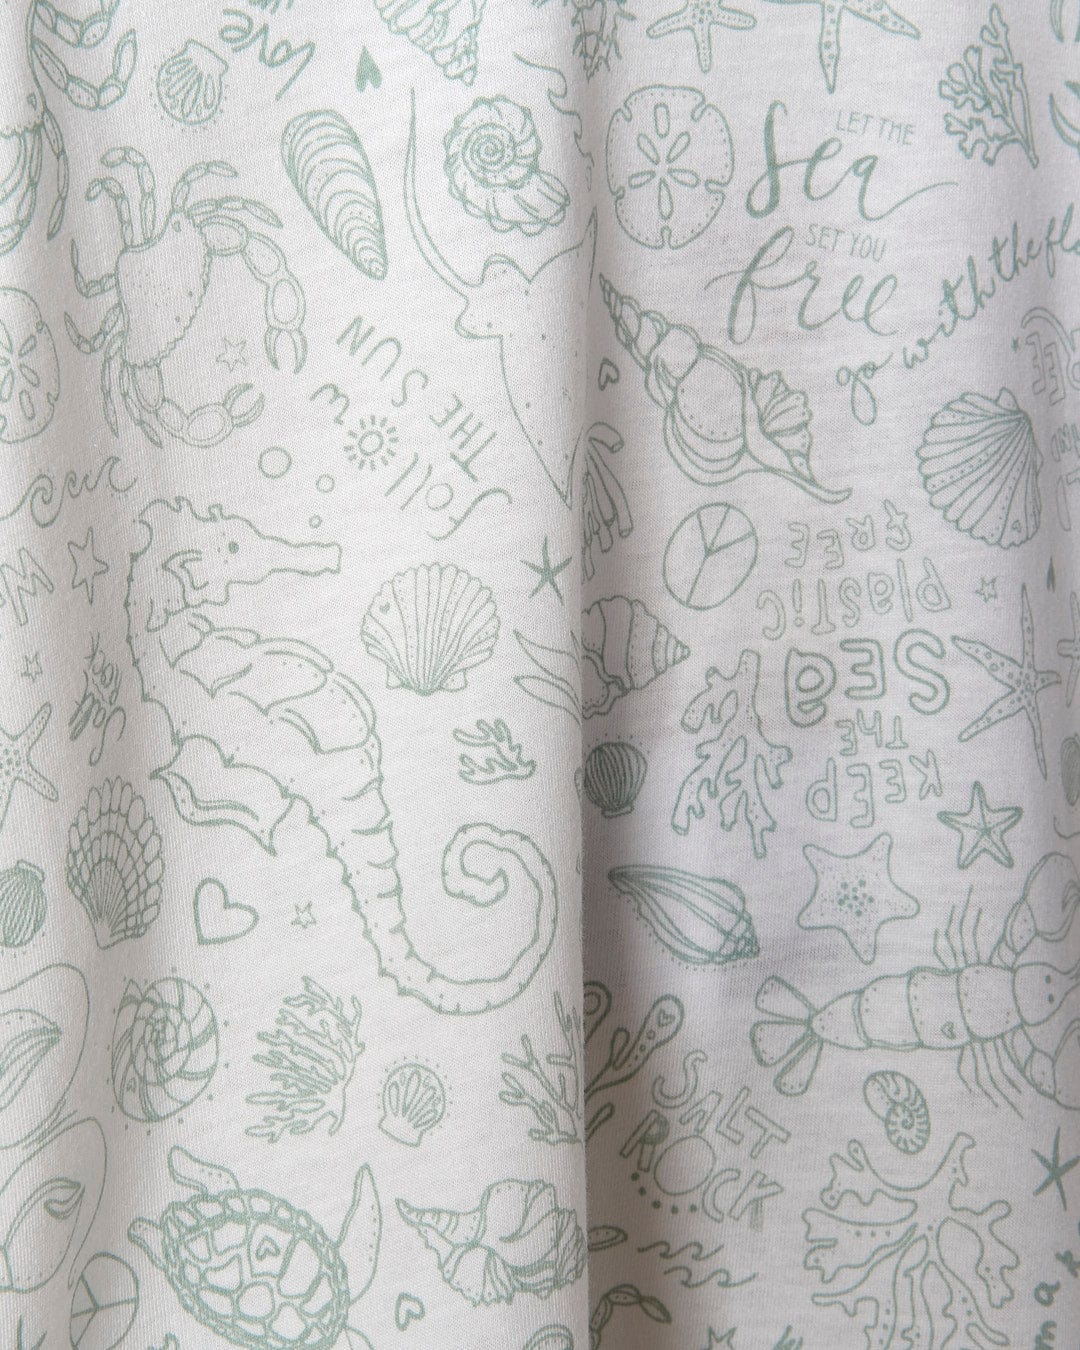 A close up of a Seashore - Saltrock Kids All Over Print Short Sleeve T-Shirt - White fabric with sea creatures on it.